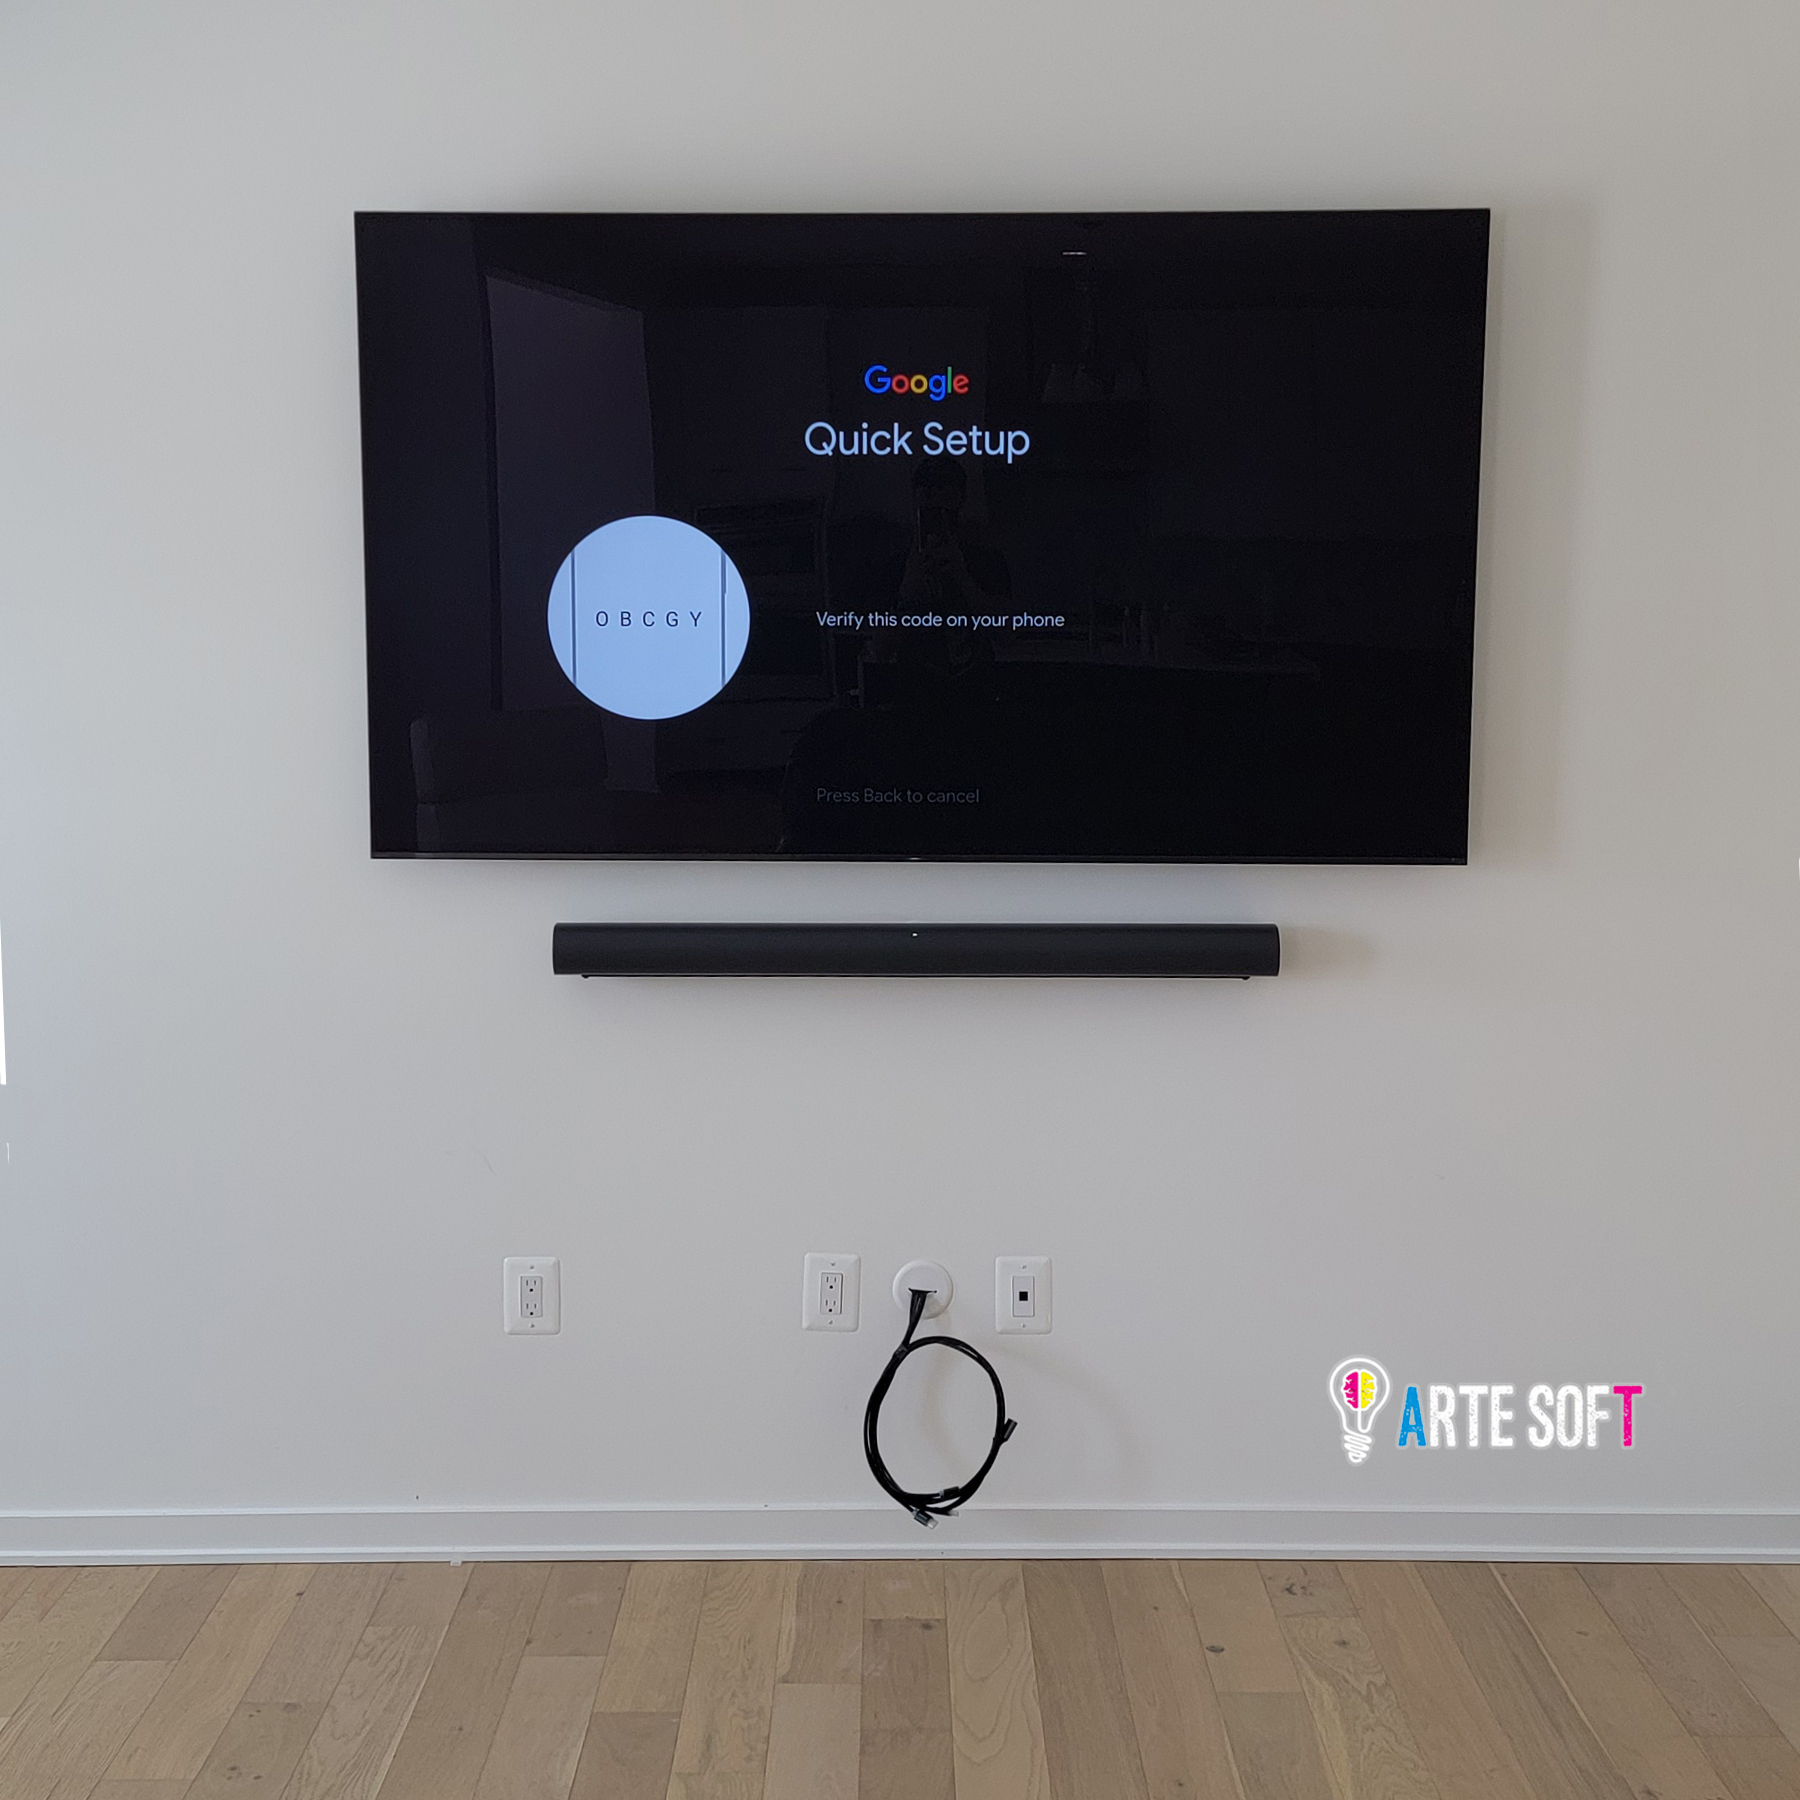 Artesoft - Same day TV Mounting and Electrician Services